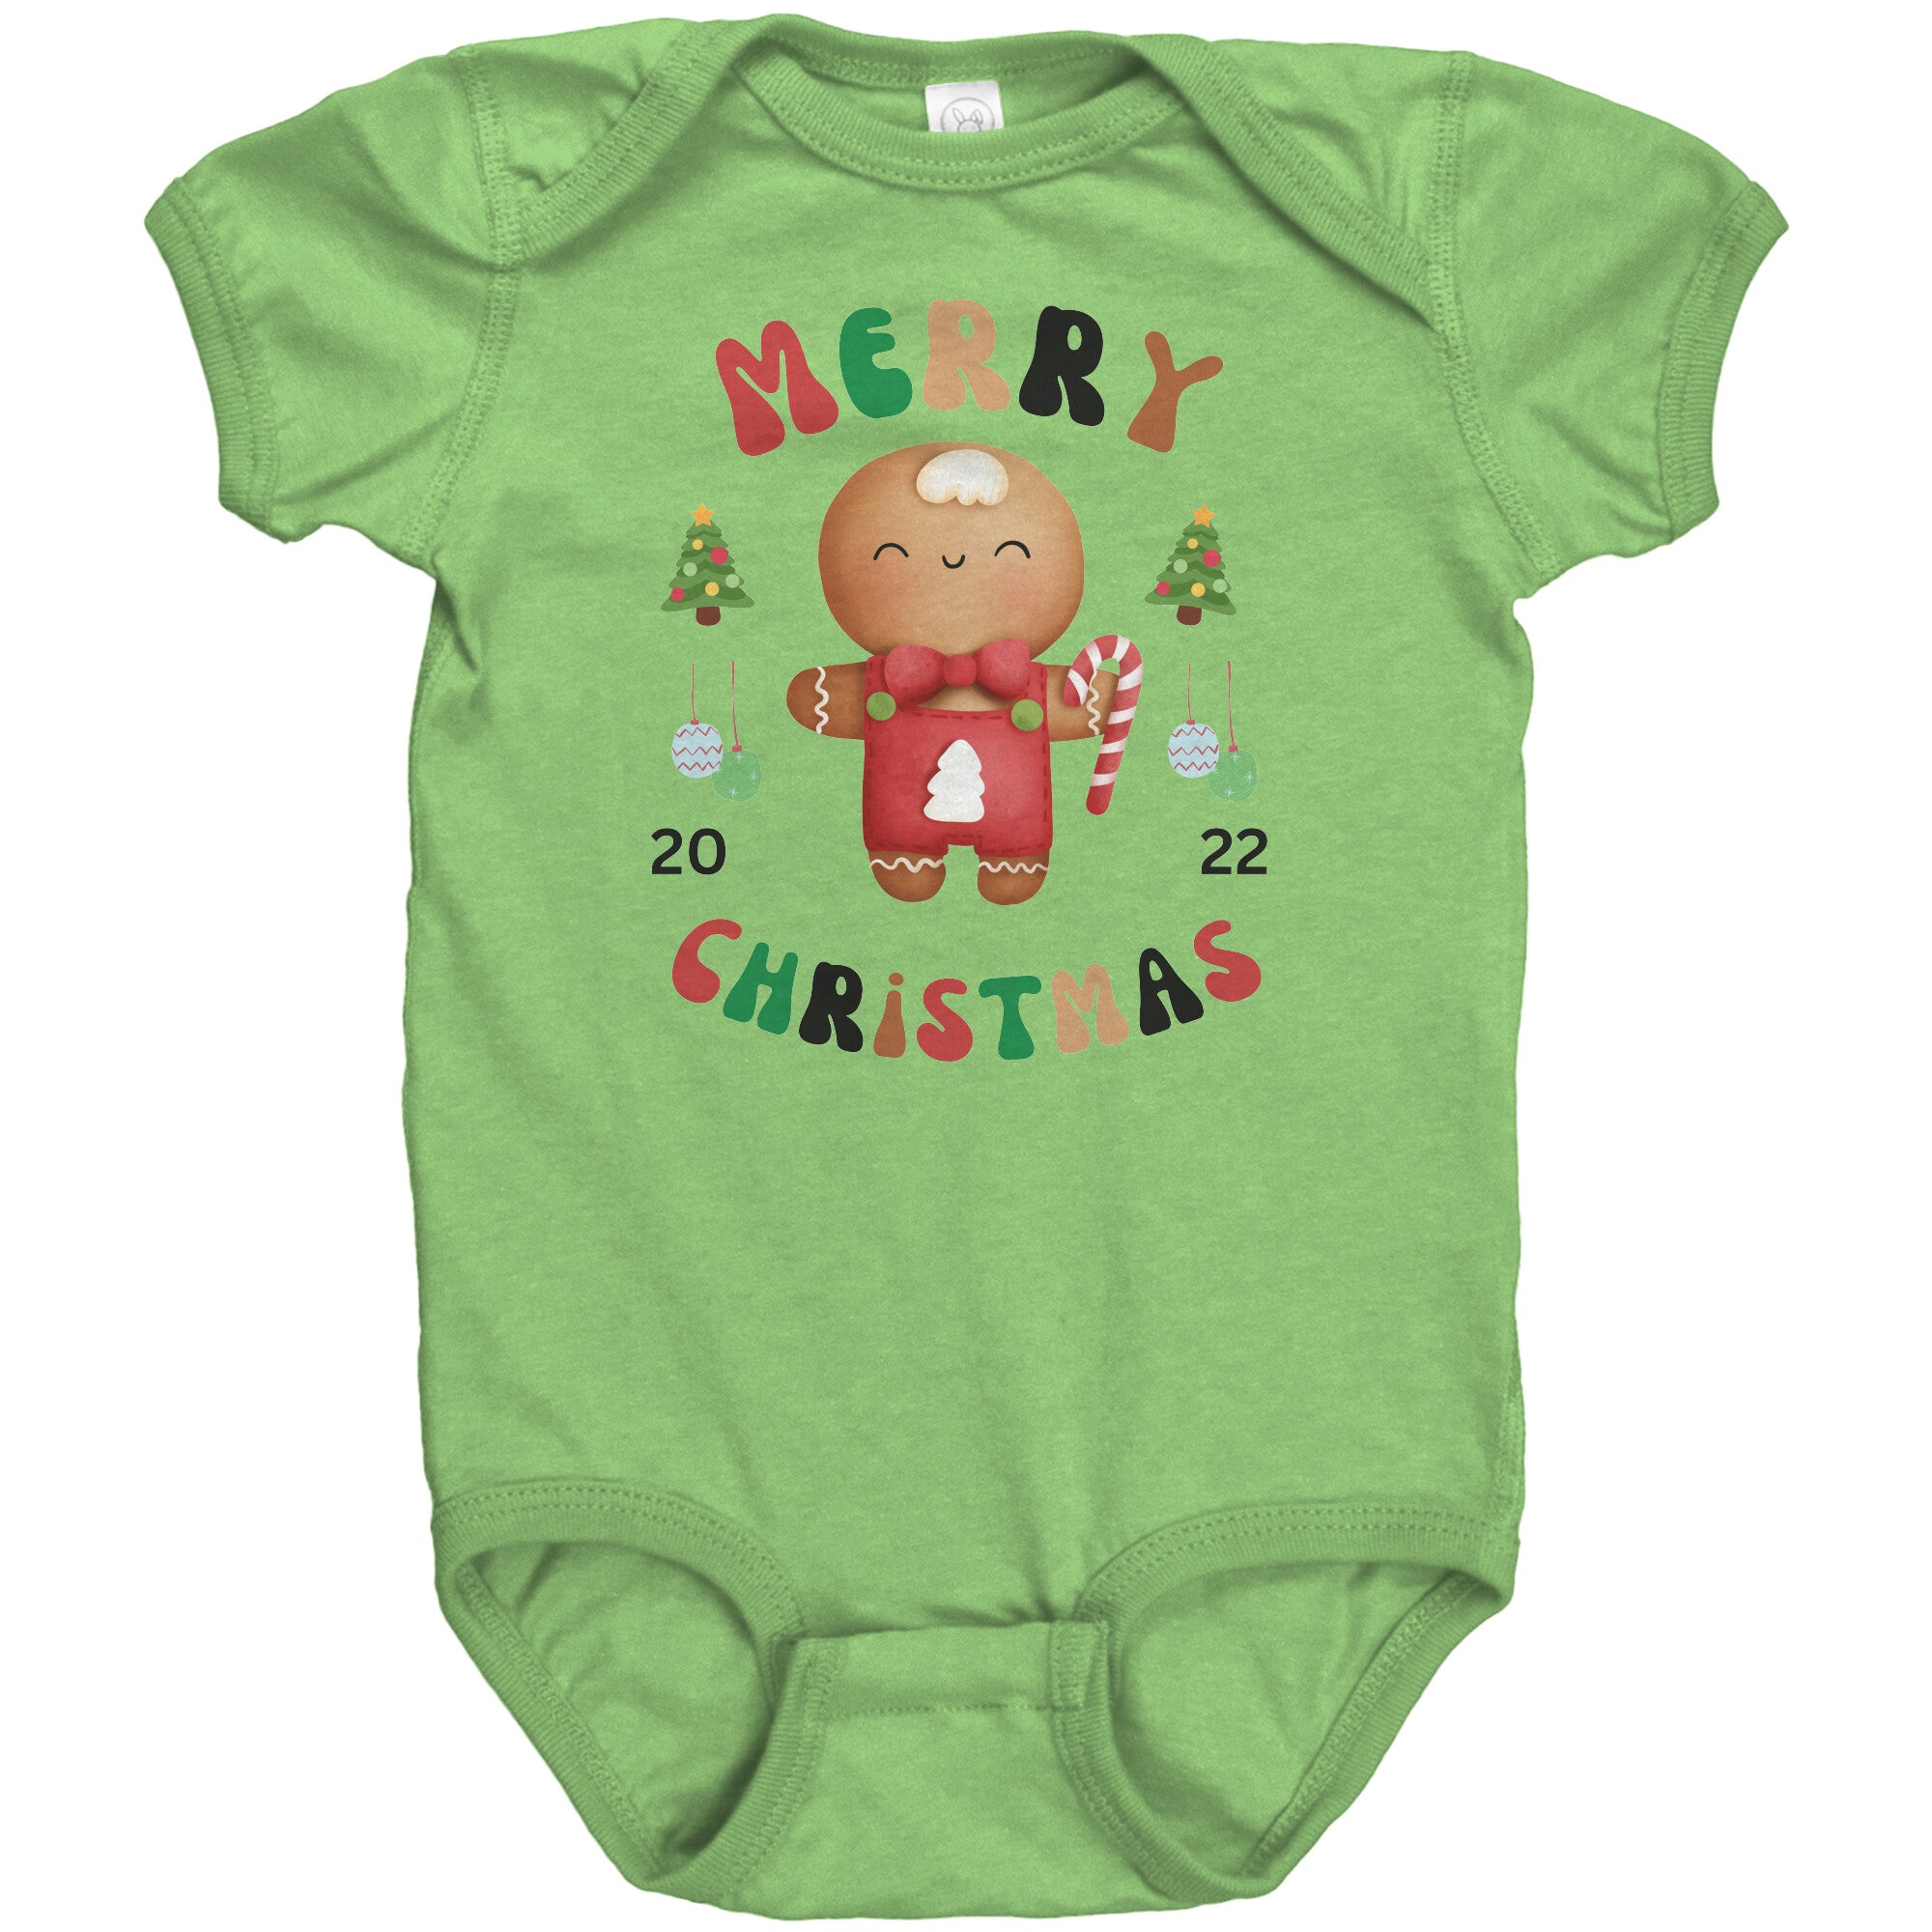 Baby Body suit christmas